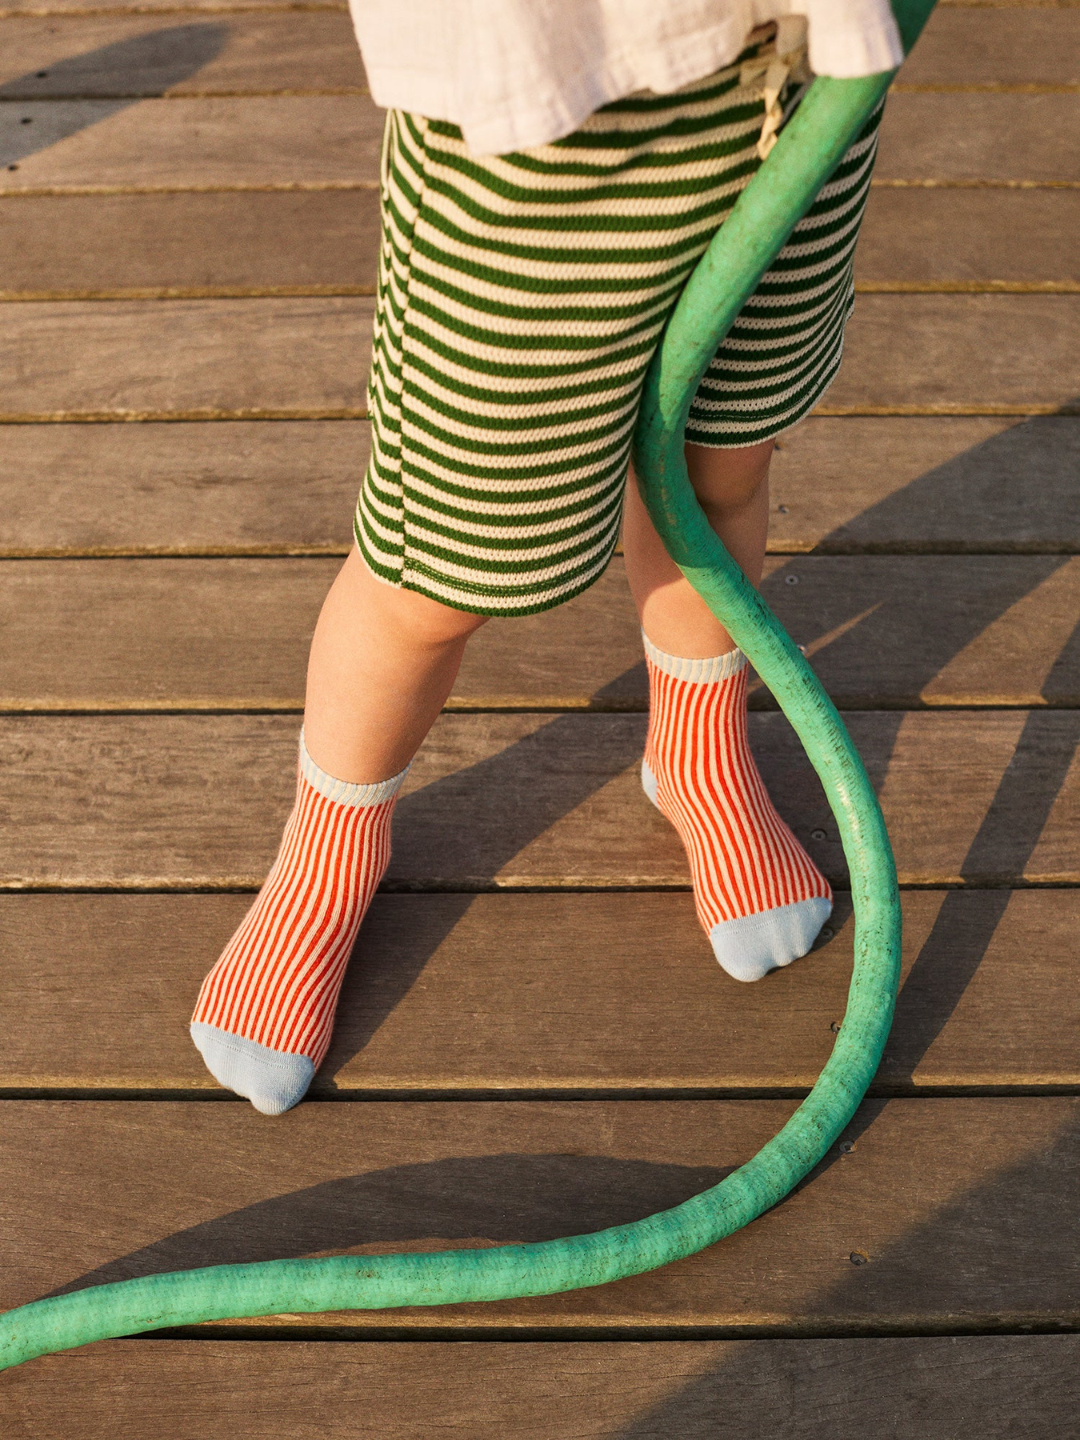 Kid wearing socks in narrow red and white vertical stripes with pale blue toe, heel, and green stripes at ankle cuff. Image is cropped below the waist showing a child wearing the socks, standing on a wooden deck, holding a green hose, and wearing green and cream striped shorts.